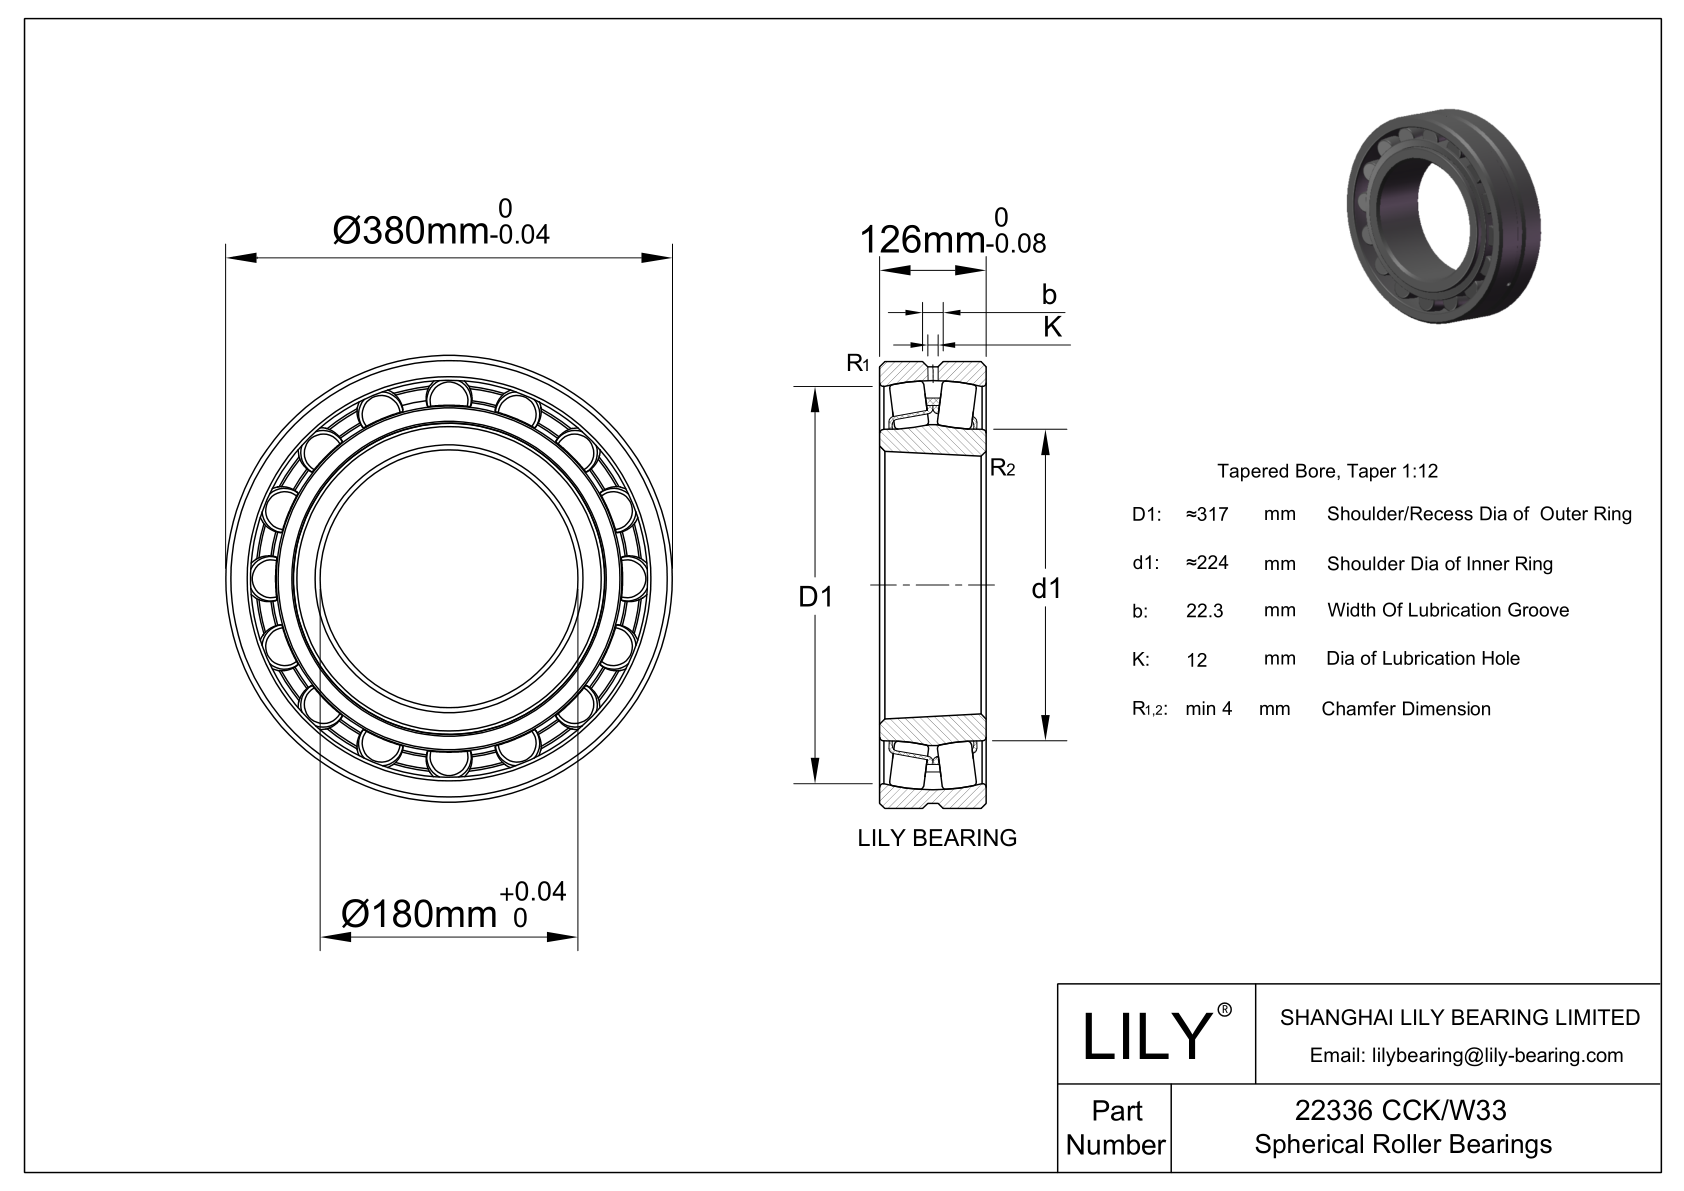 22336 CCK/W33 Double Row Spherical Roller Bearing cad drawing